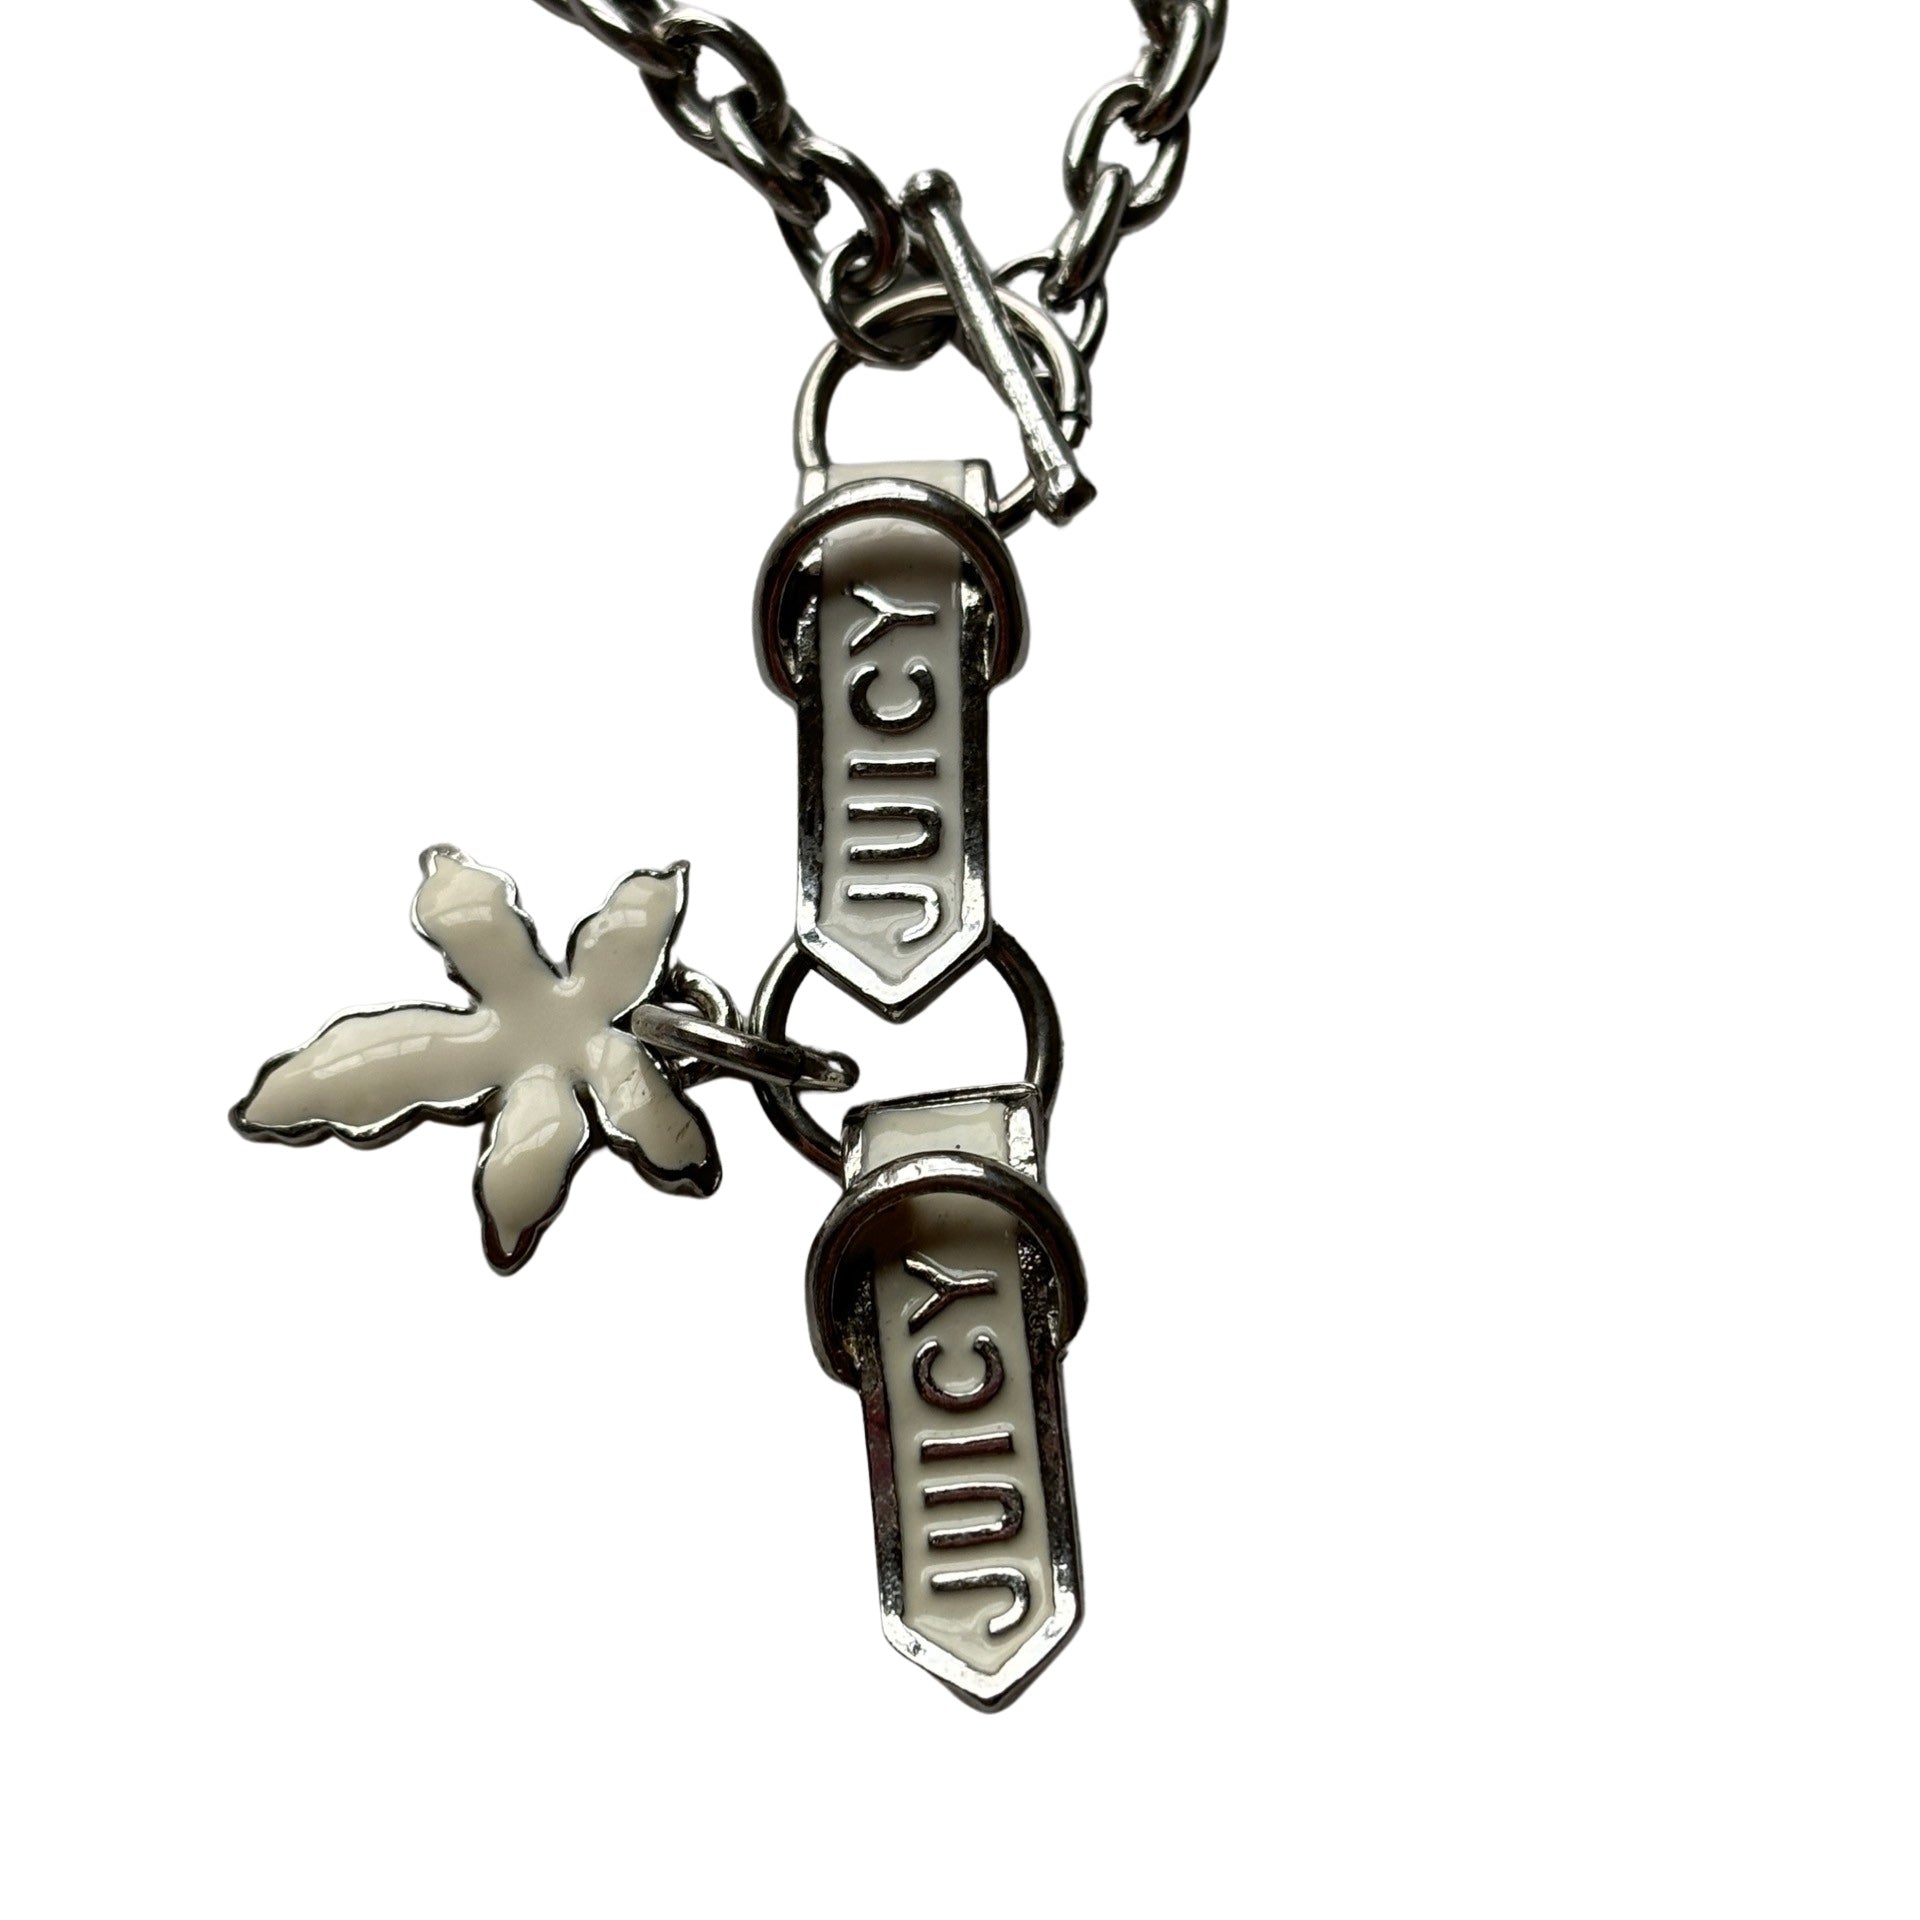 Juicy Couture Charm Necklace